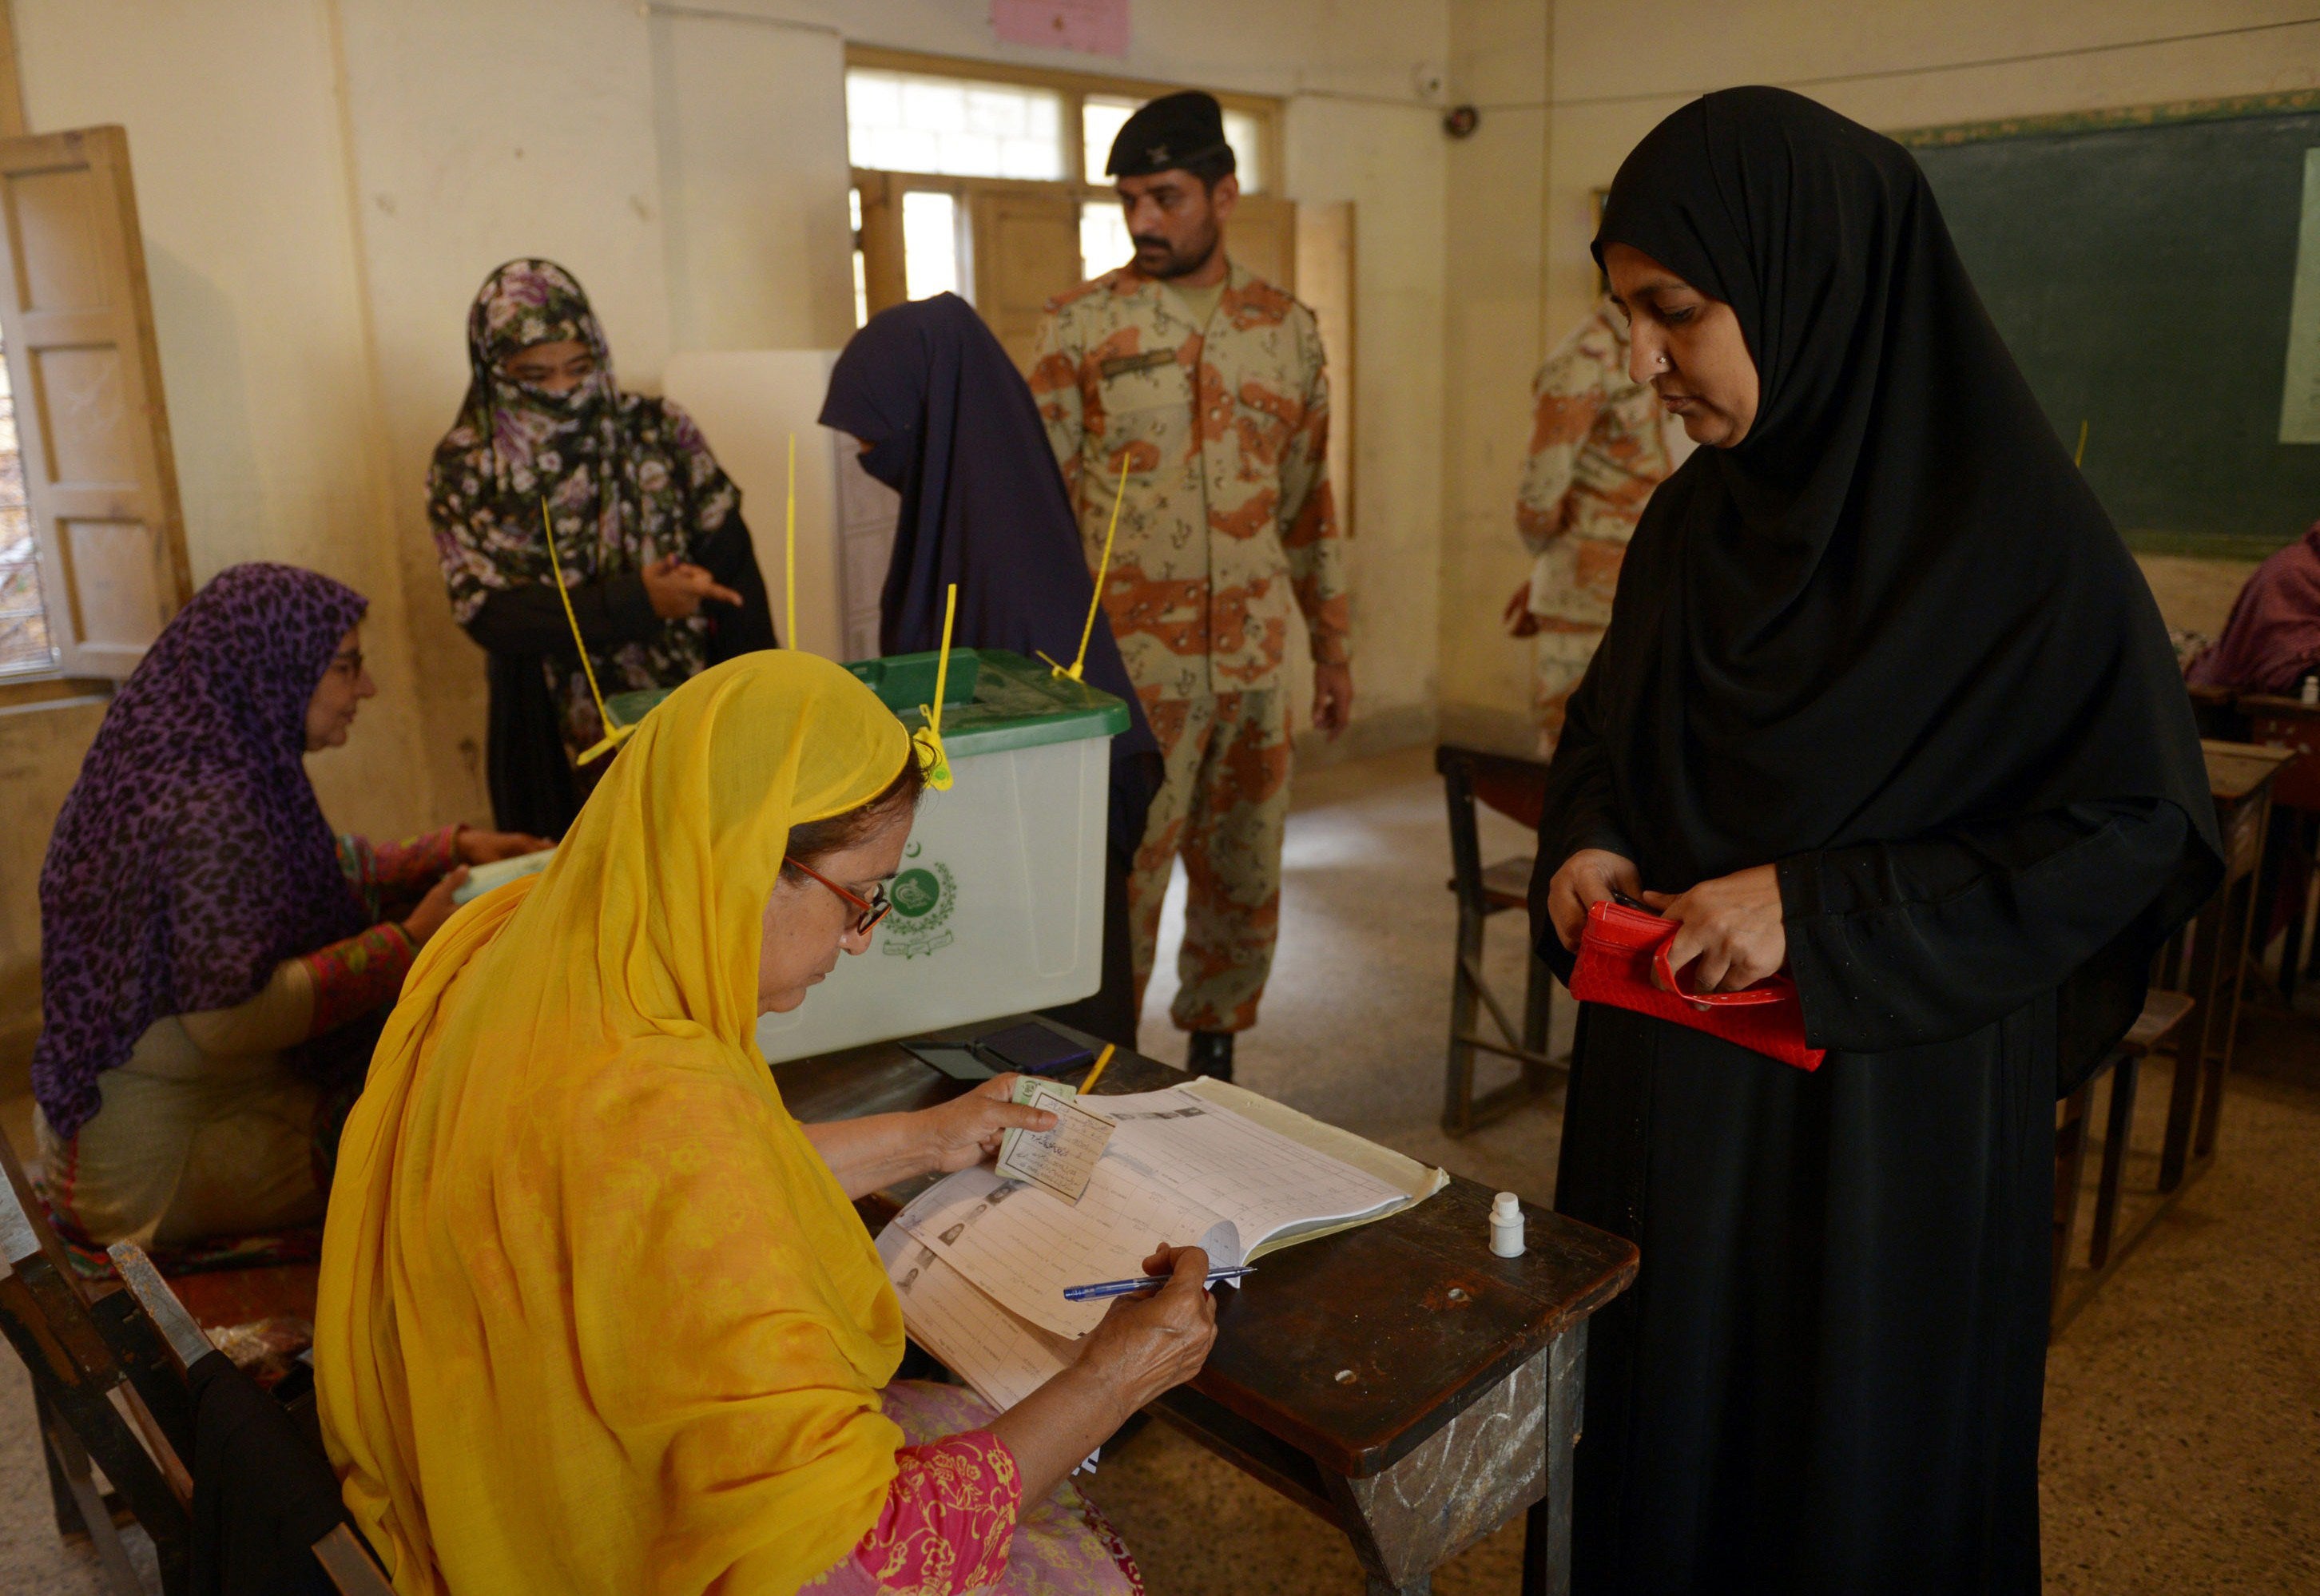 A voter casting her vote at a Karachi polling station in April 2015 (Photo by RIZWAN TABASSUM/AFP/Getty Images)